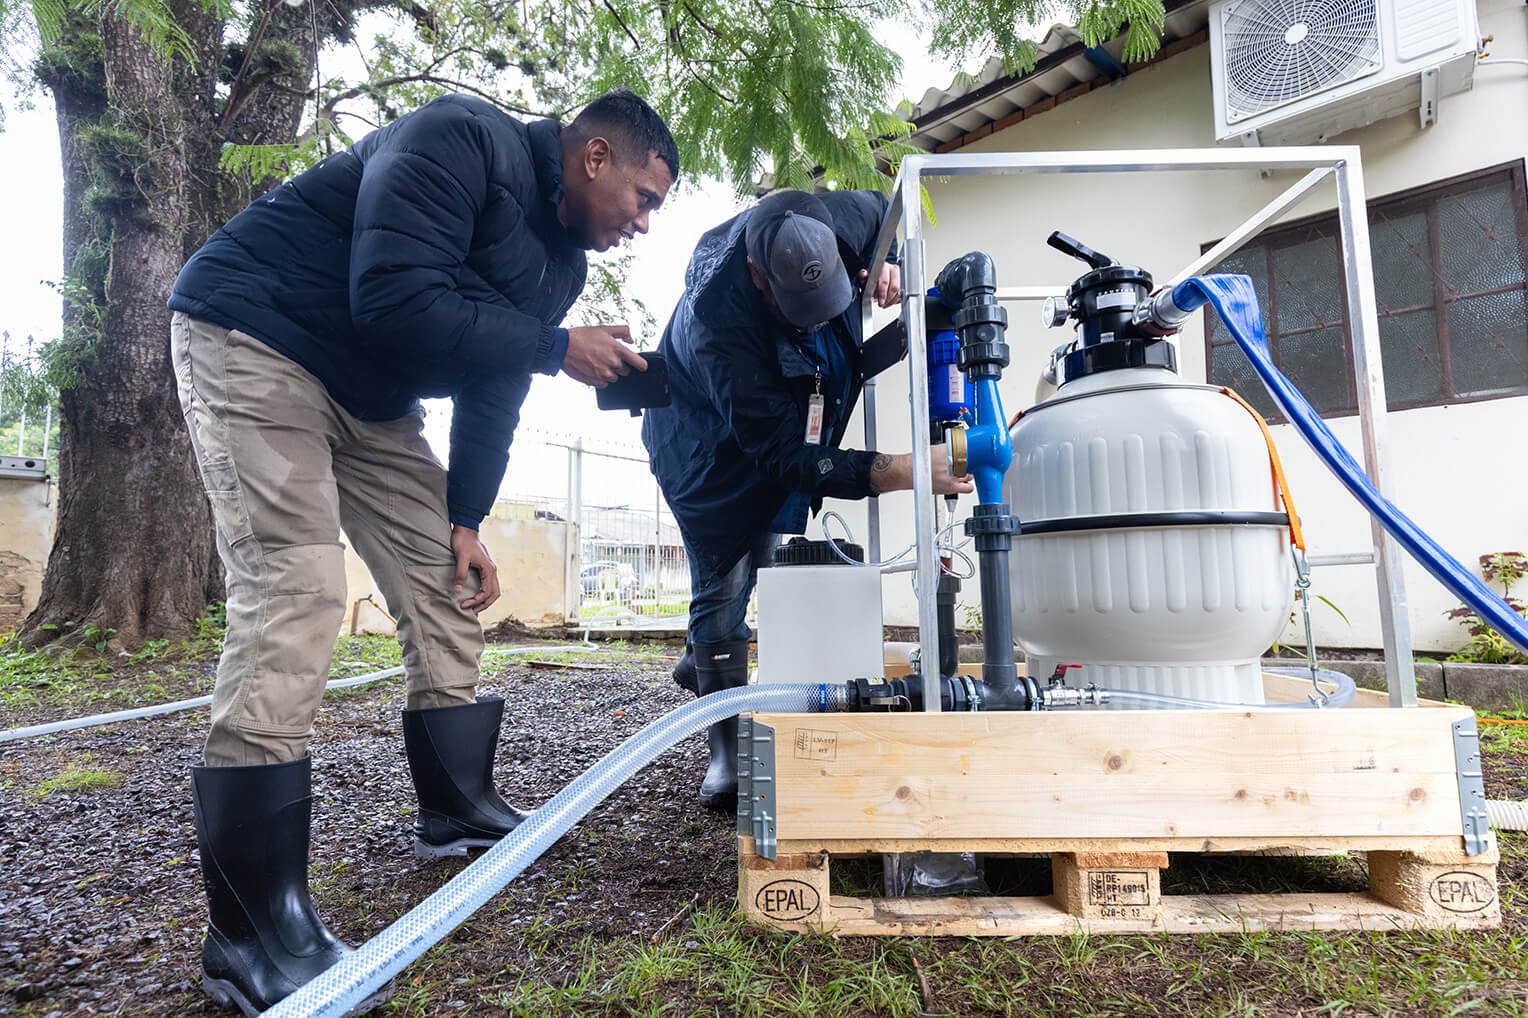 Samaritan's Purse staff members install a community water filtration system. A majority of the population in the region still have no access to clean water.